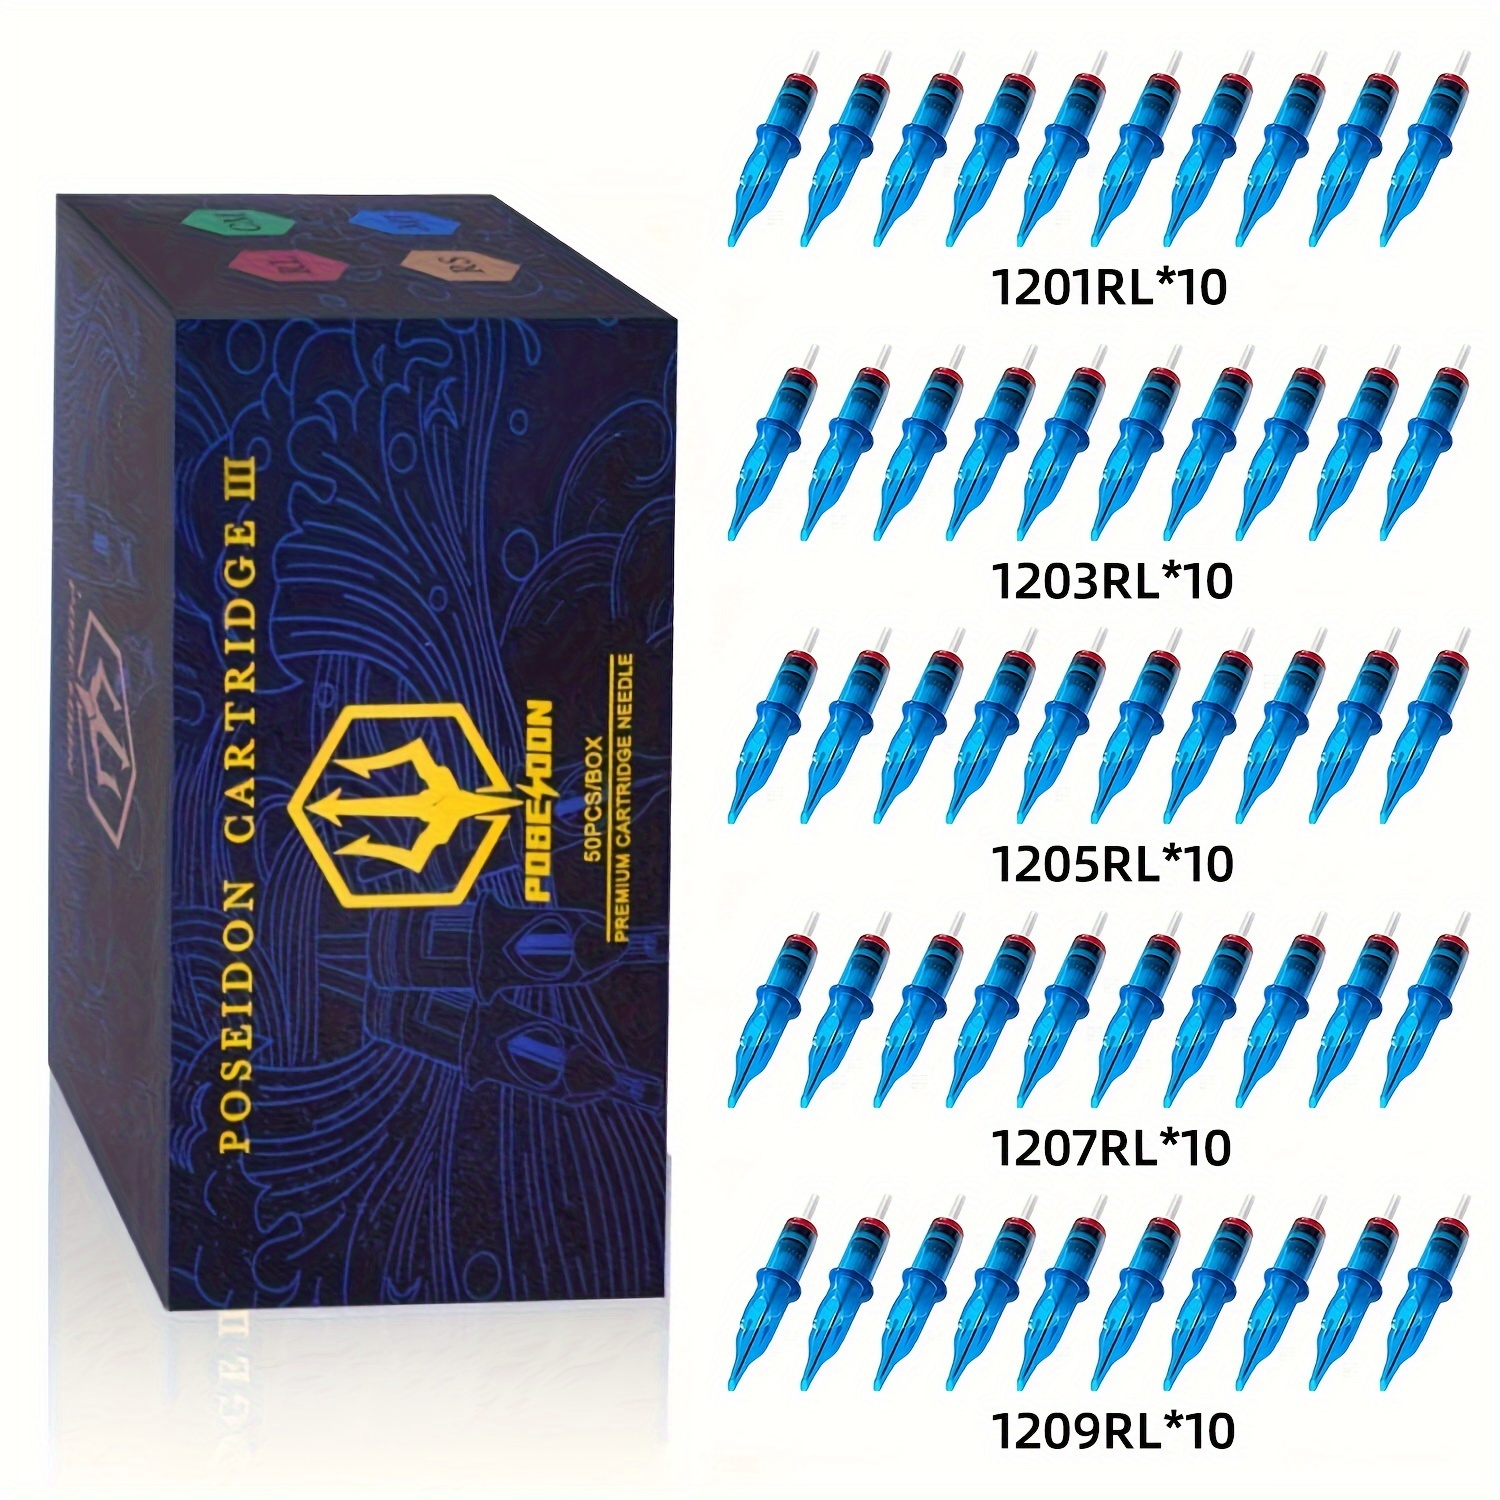 

Tattoo Cartridge Needles Set - Mixed Sizes, Sterilized With Membrane Safety Cartridges, For Professional Tattoo Artists